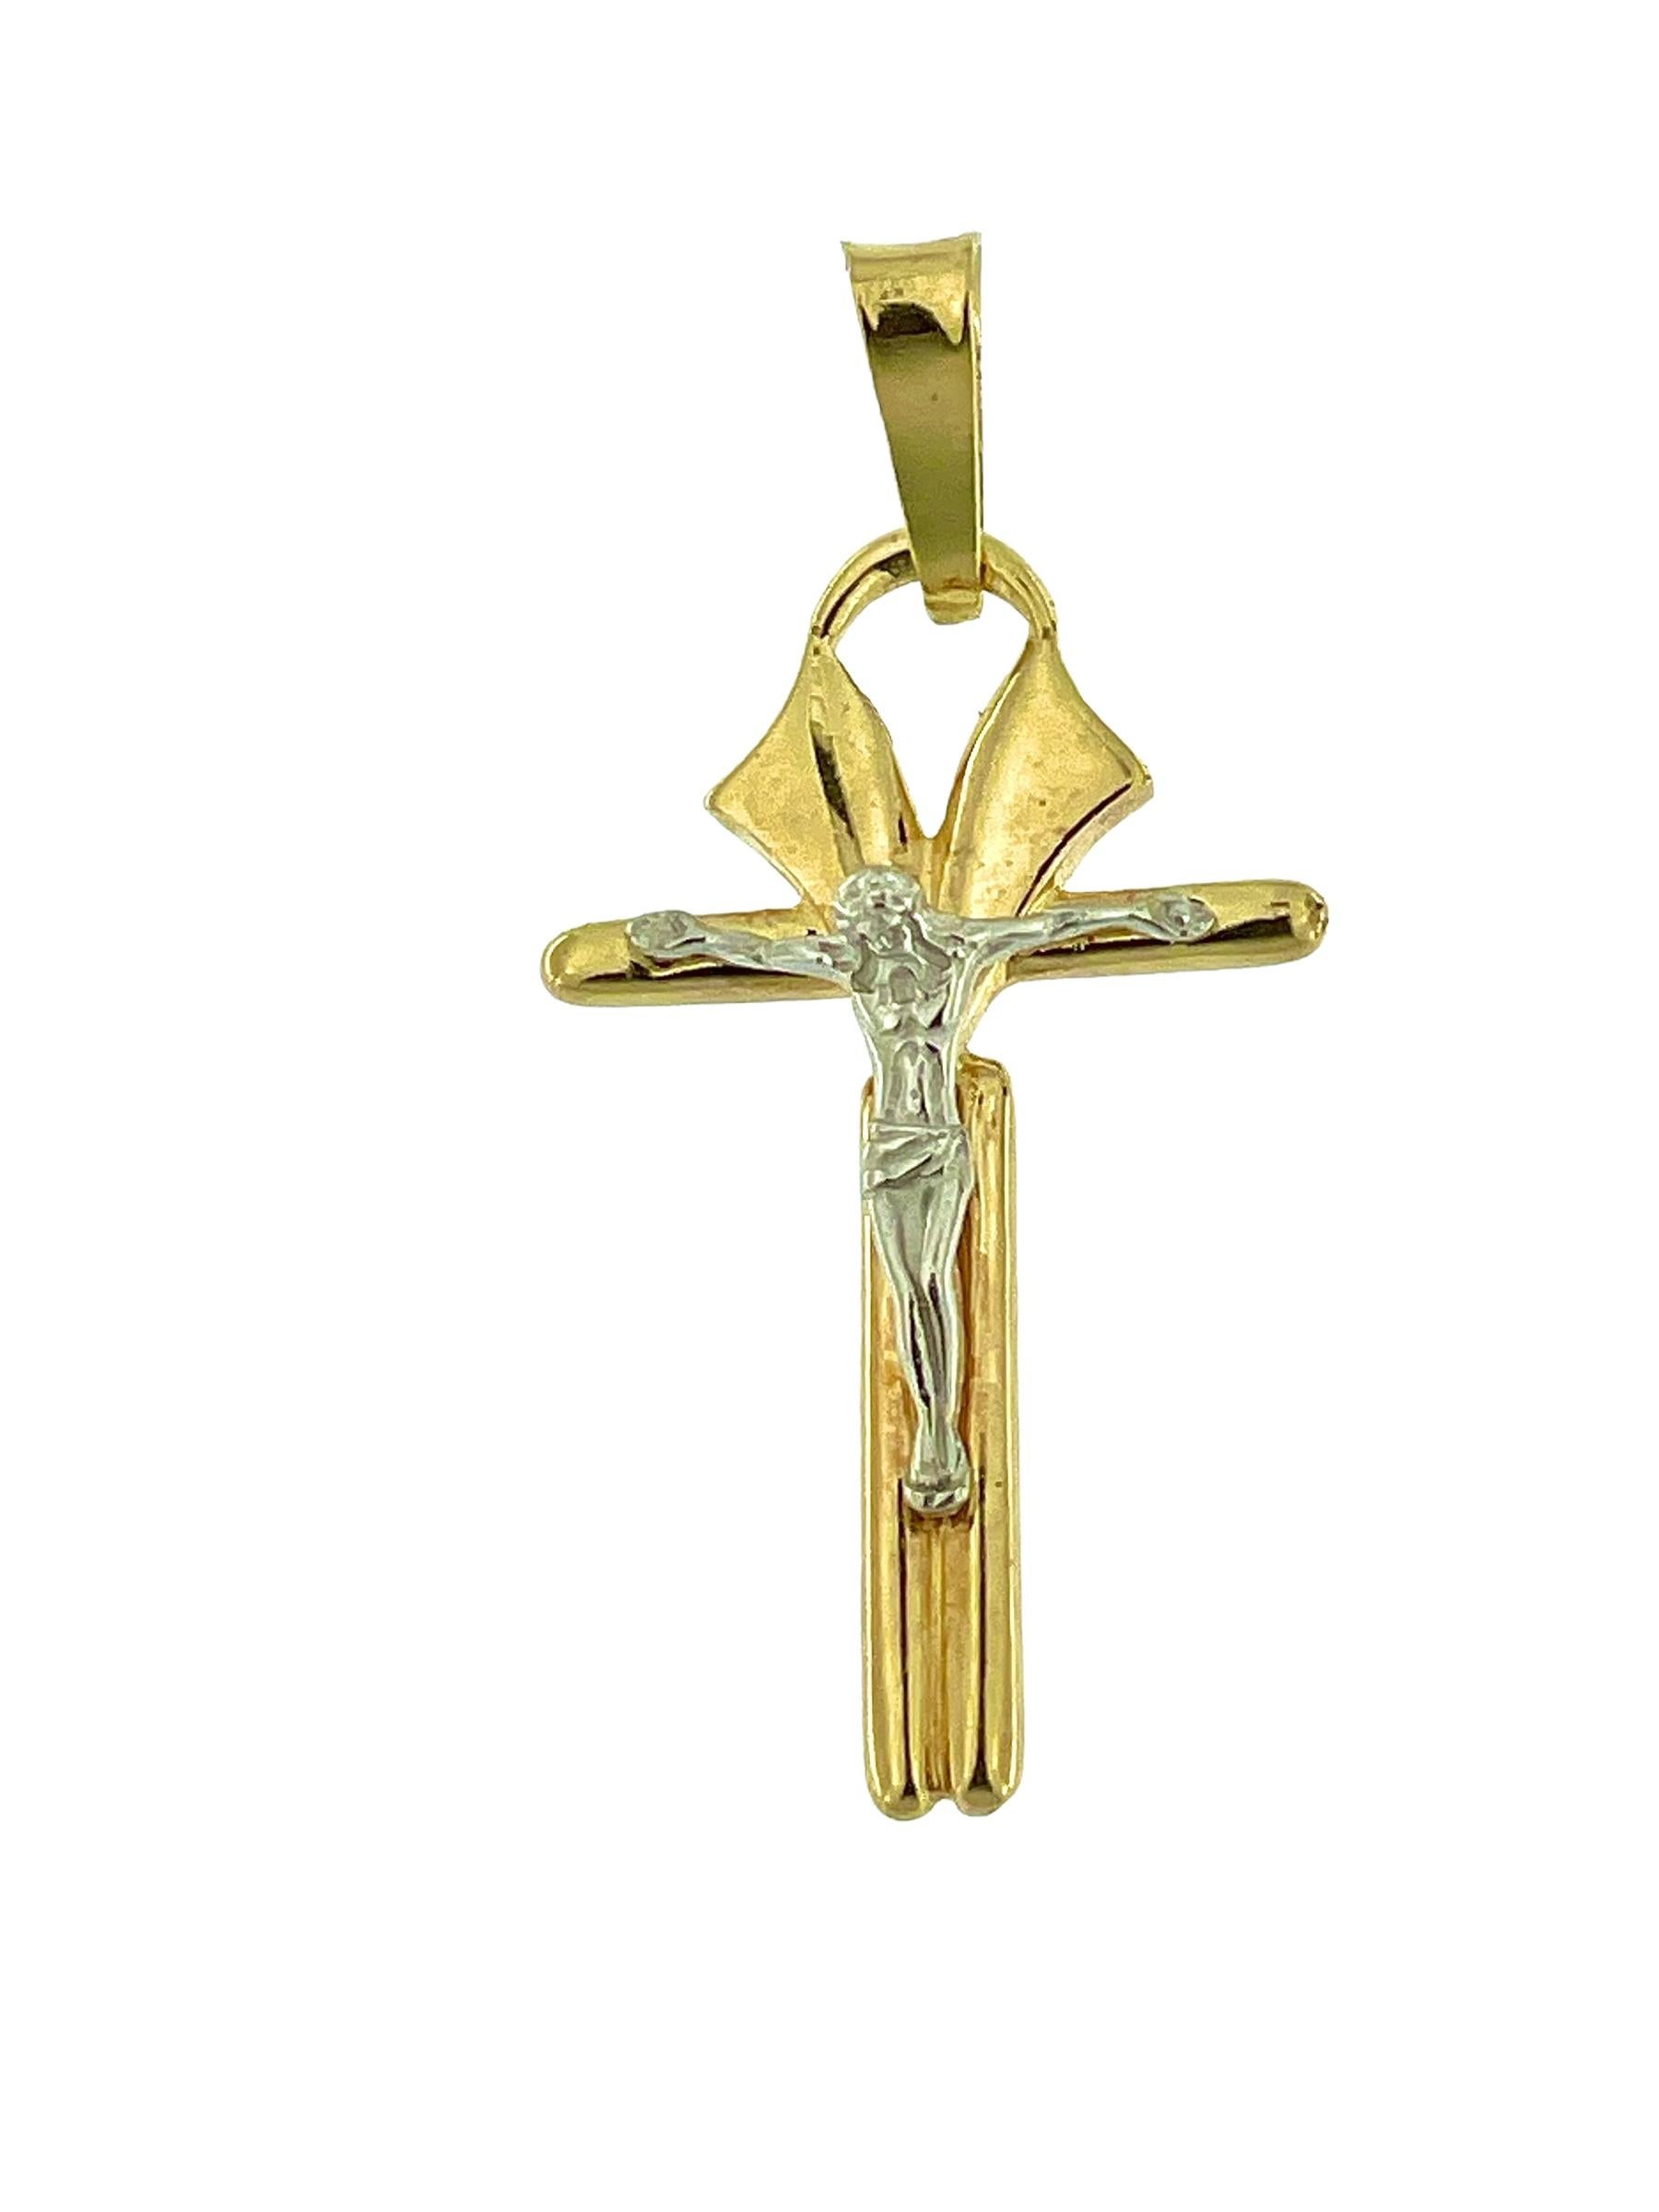 The Italian Modern Crucifix in Yellow and White Gold embodies a contemporary interpretation of the traditional crucifix design, infused with Italian artistry and craftsmanship. Crafted from 18-karat yellow and white gold, this stylized crucifix